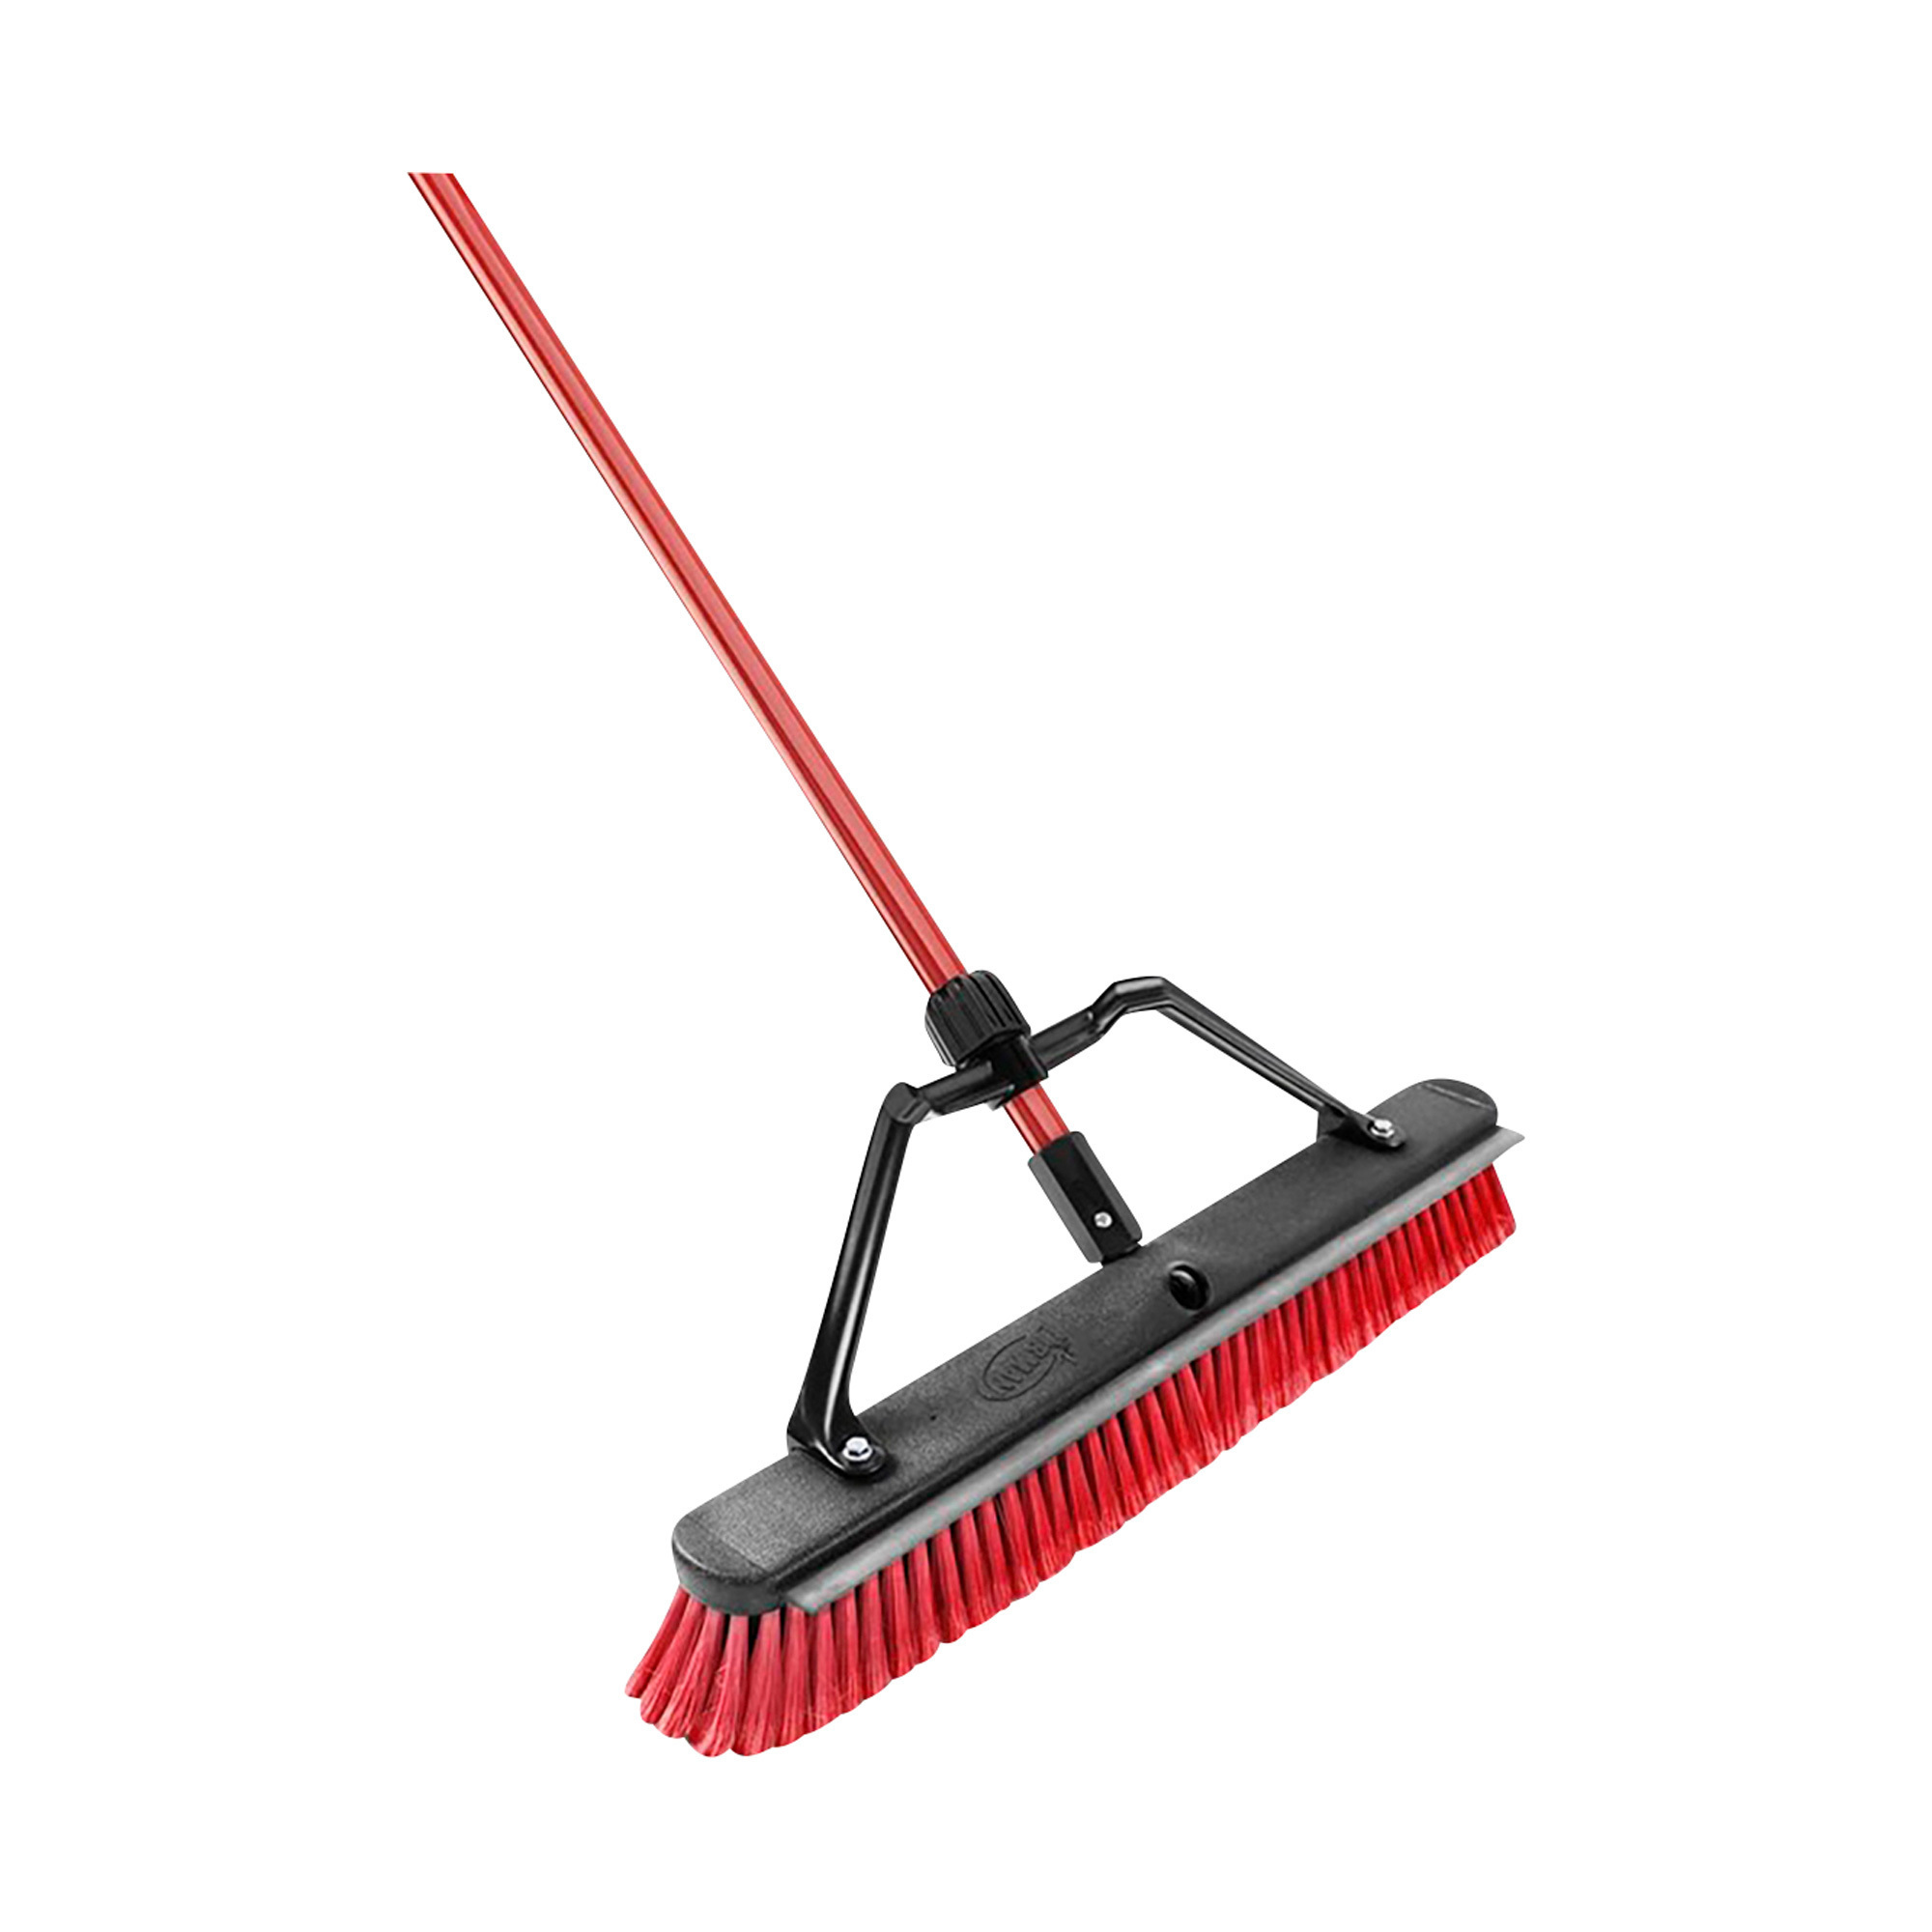 Libman Push Broom with Squeegee, 64Inch L, Model 1230